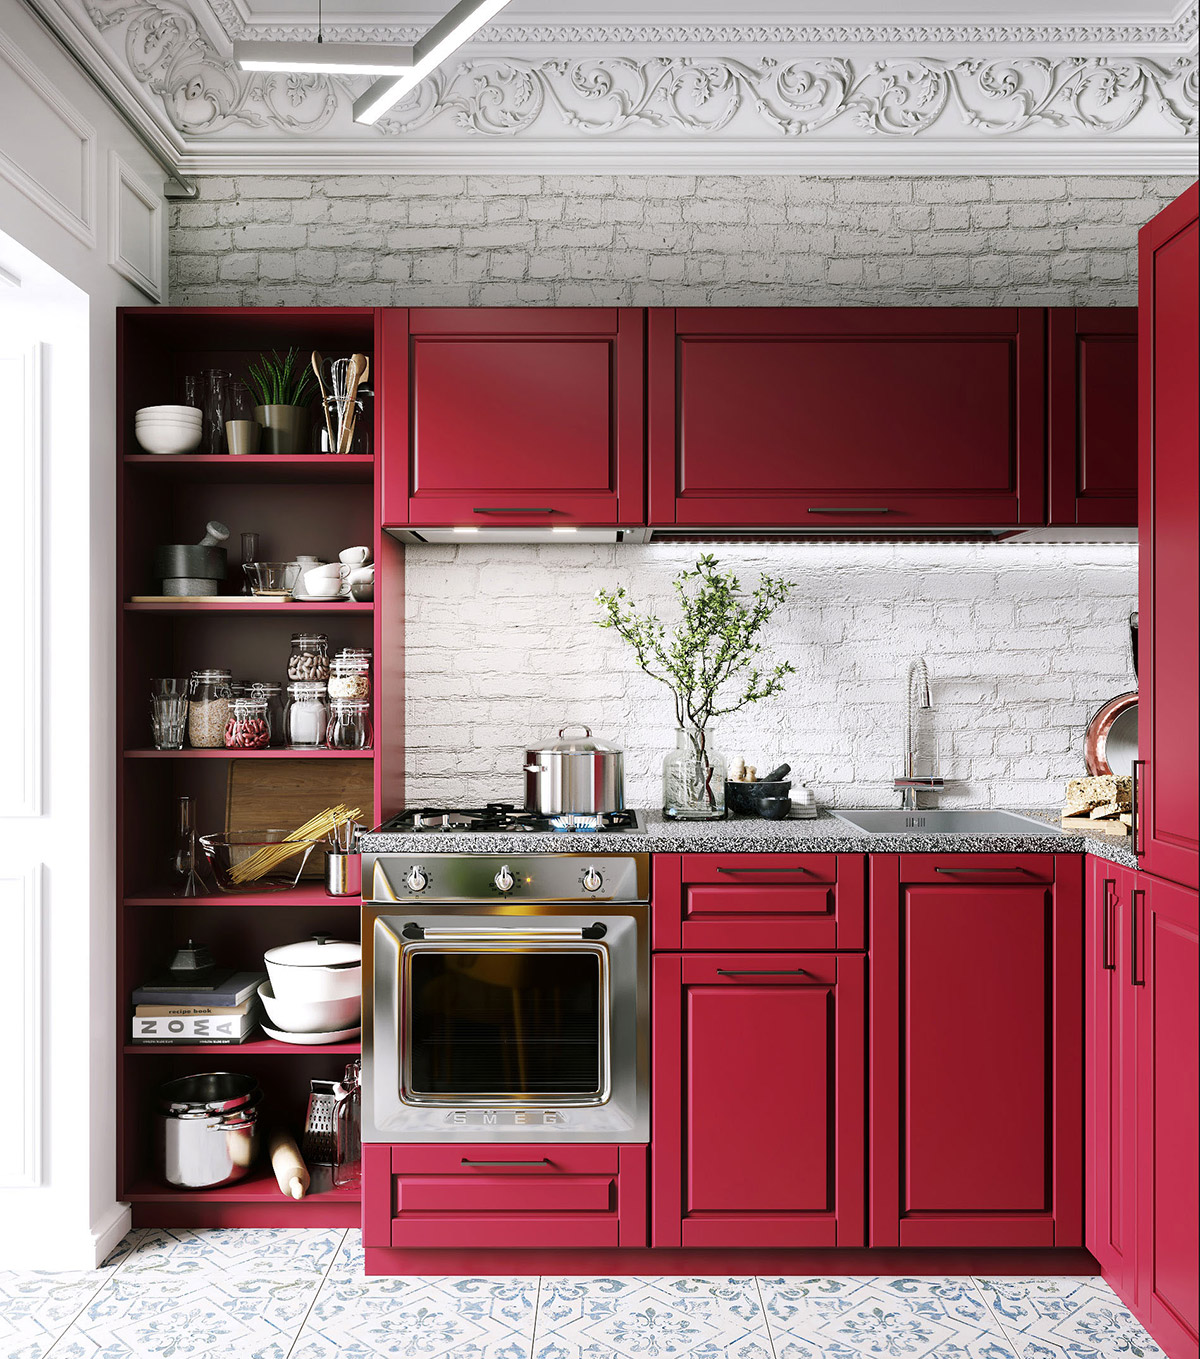 16 Inspiring Ways to Use Red in the Kitchen